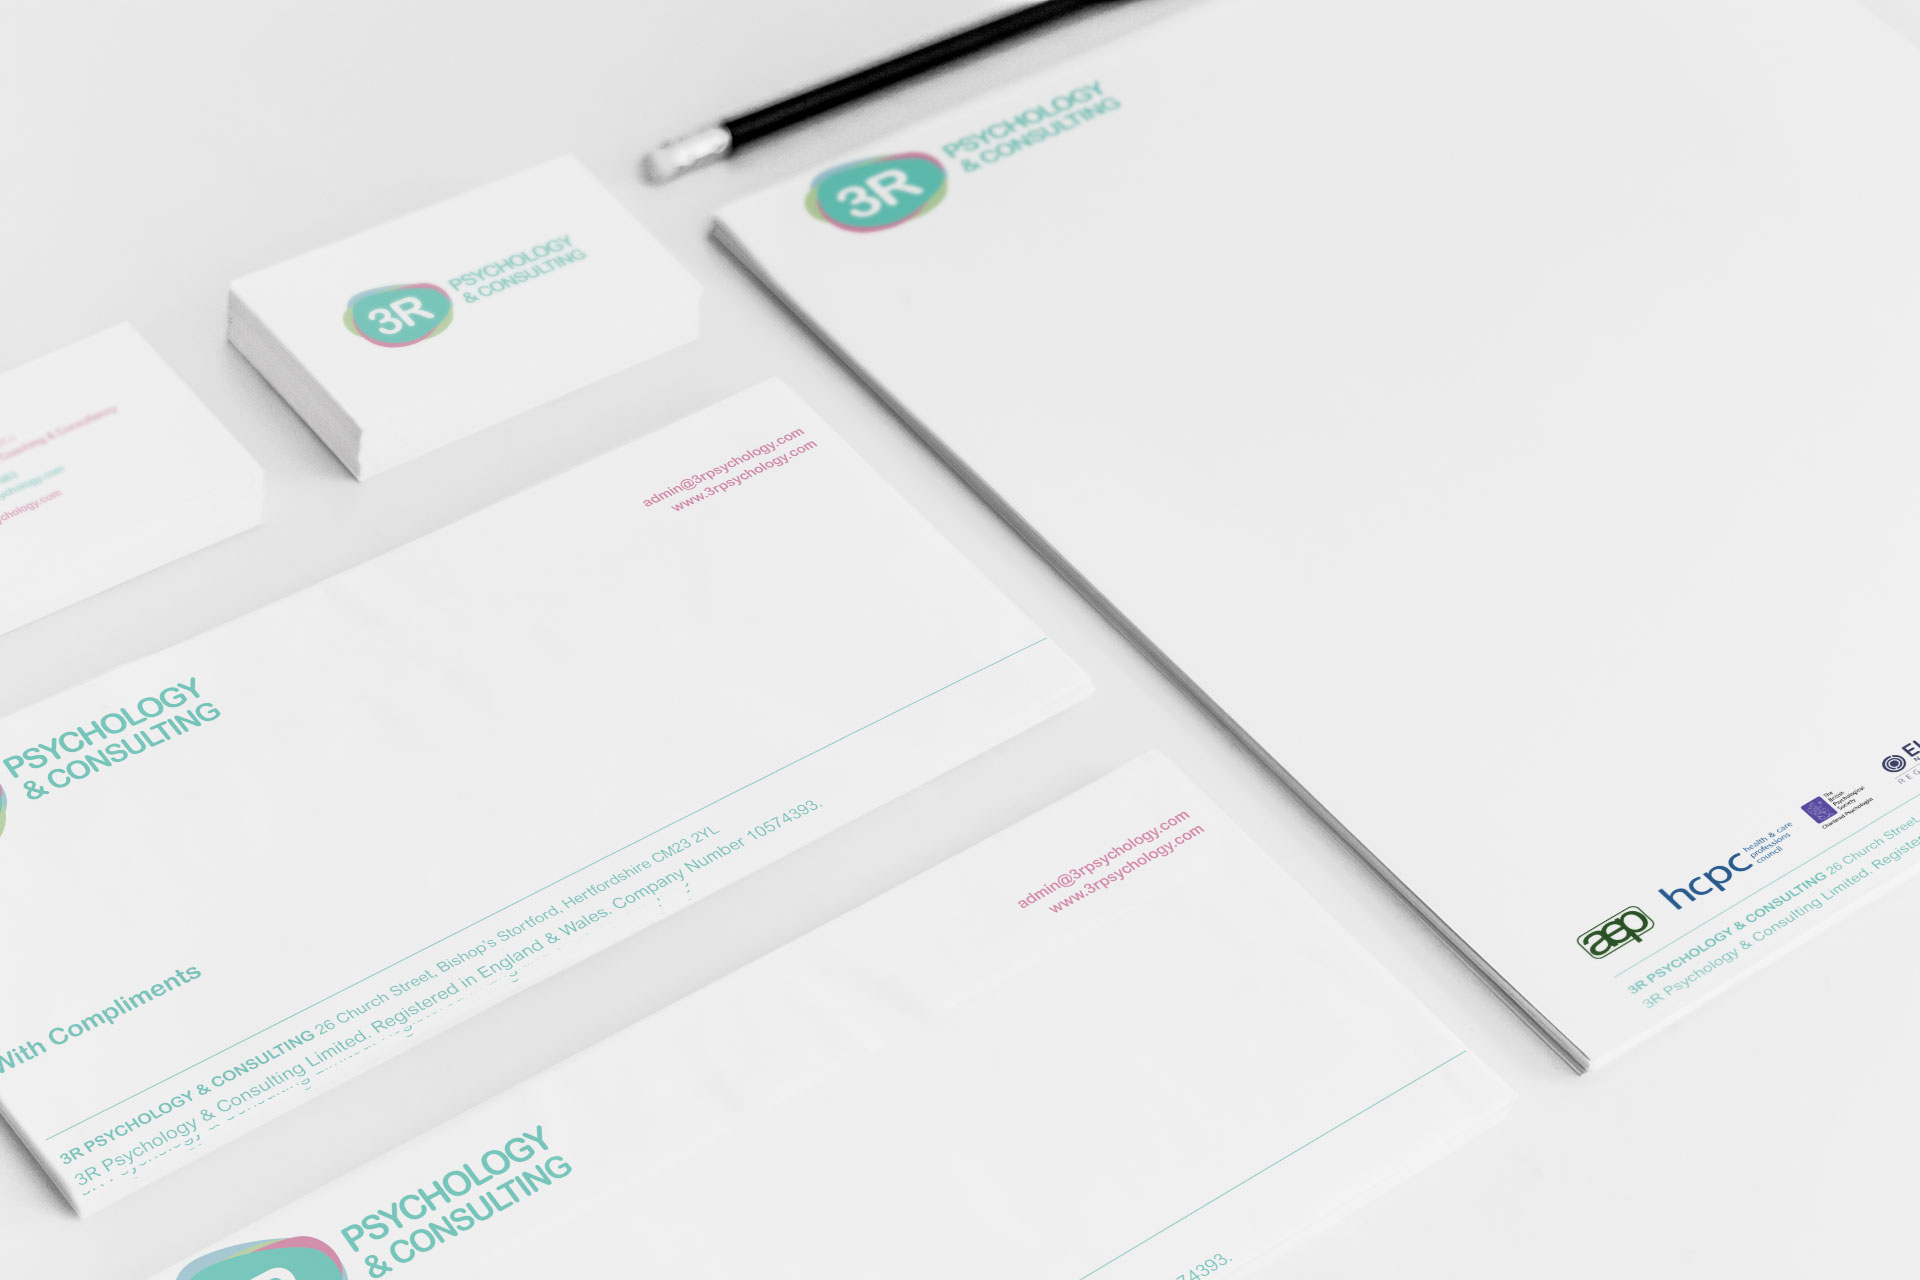 3R Business stationary